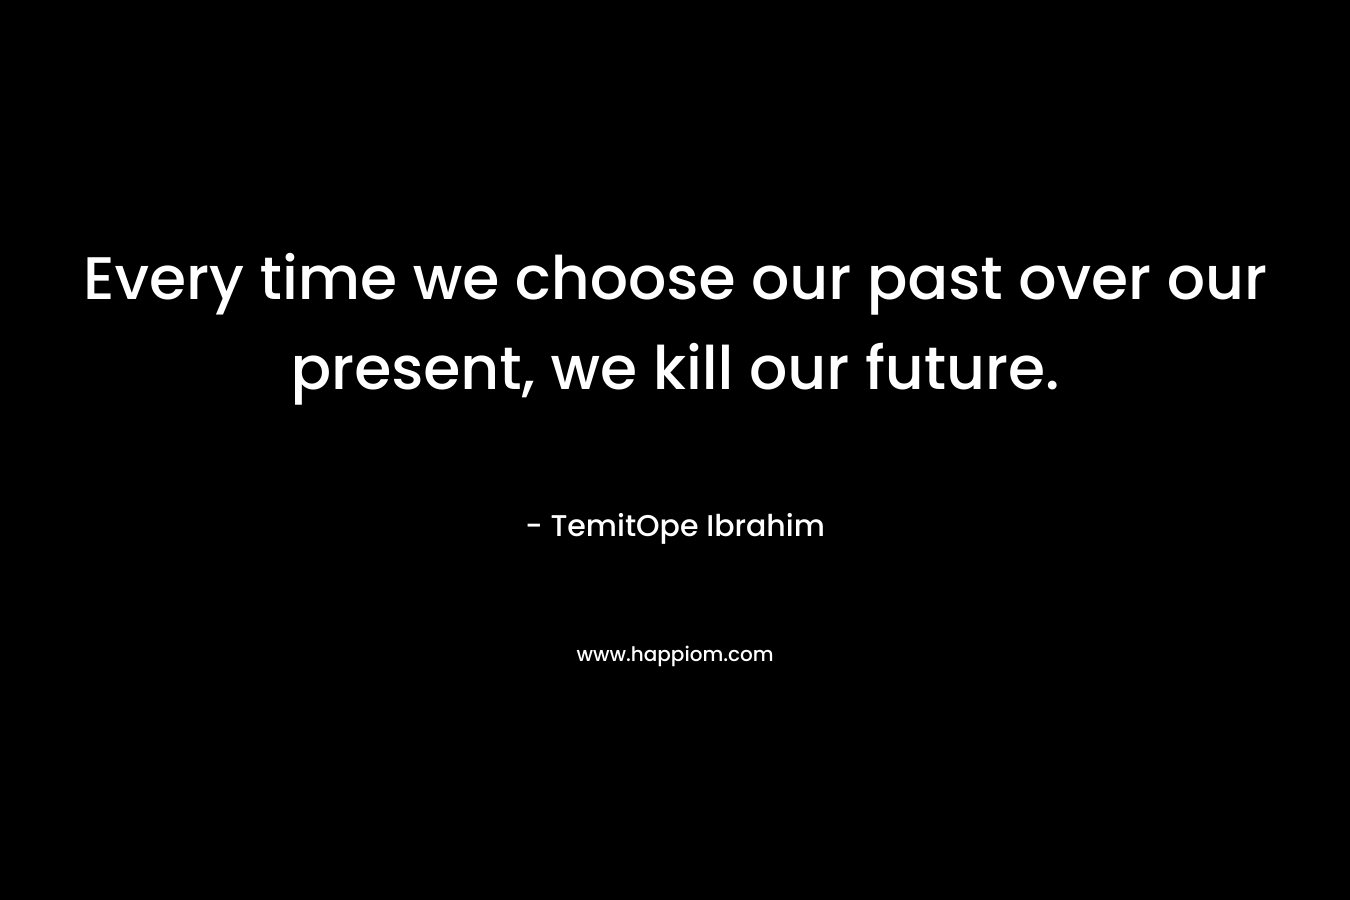 Every time we choose our past over our present, we kill our future.